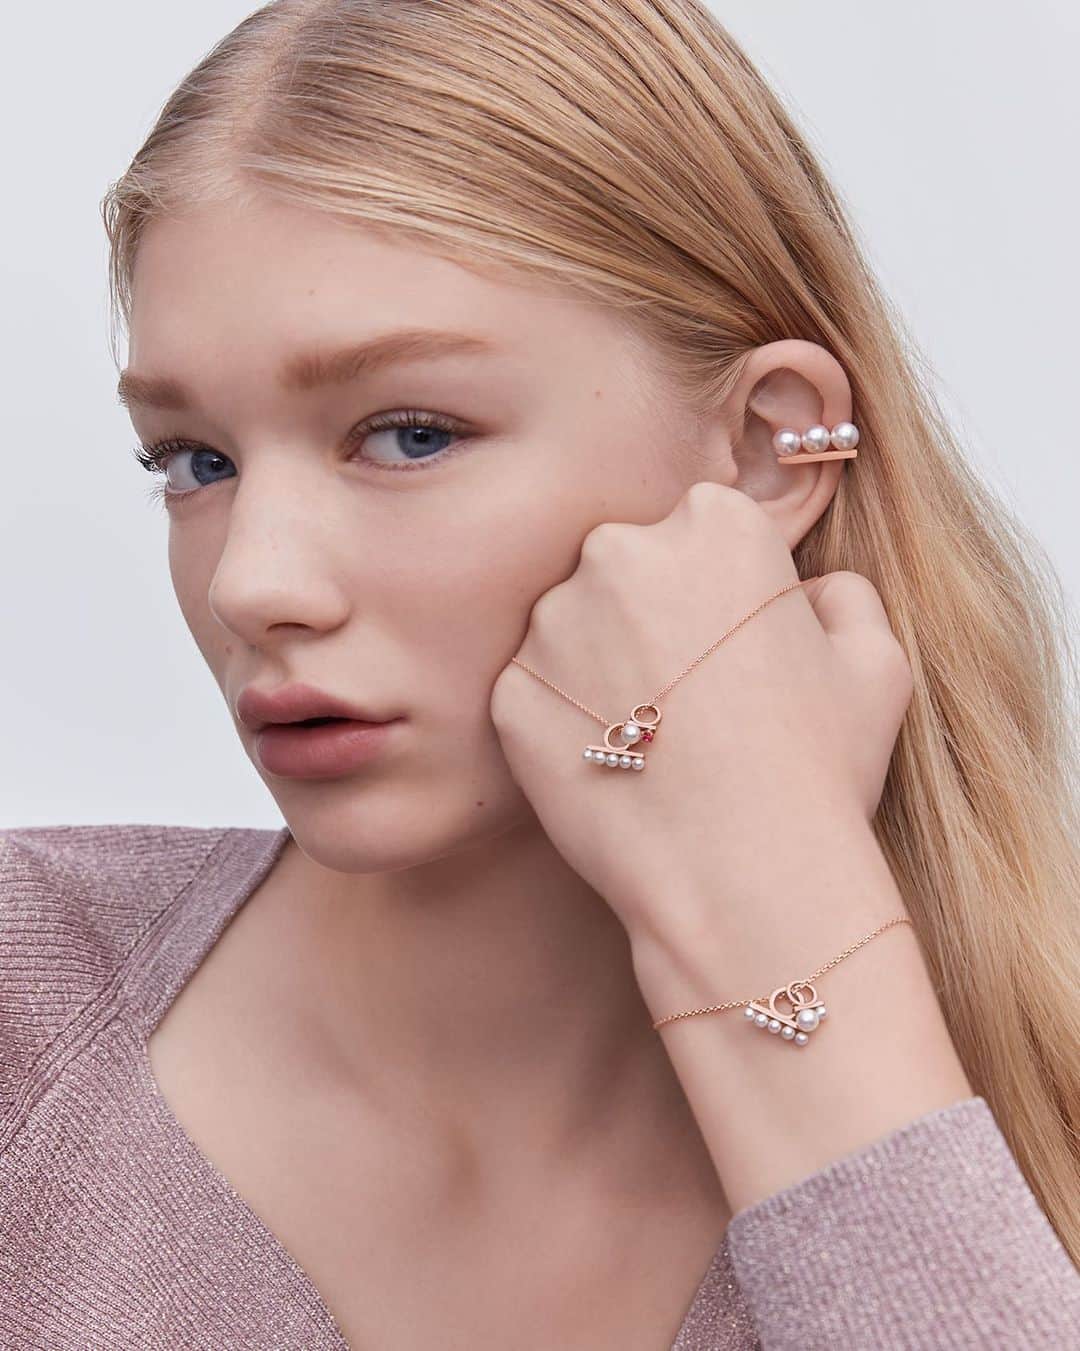 TASAKIのインスタグラム：「The petite birthstones and pearl charms from the ‘balance Charm Gift’ collection are designed to sparkle with every movement. Adorable jewellery for the holidays that fills your heart with happiness.  多彩なバースストーンとパールのミニチャームが揺れる「balance Charm Gift」。 心踊るホリデーシーズンは、愛らしいジュエリーのギフトで幸せをかたちにして。  #TASAKI #Holiday #TASAKIbalance」